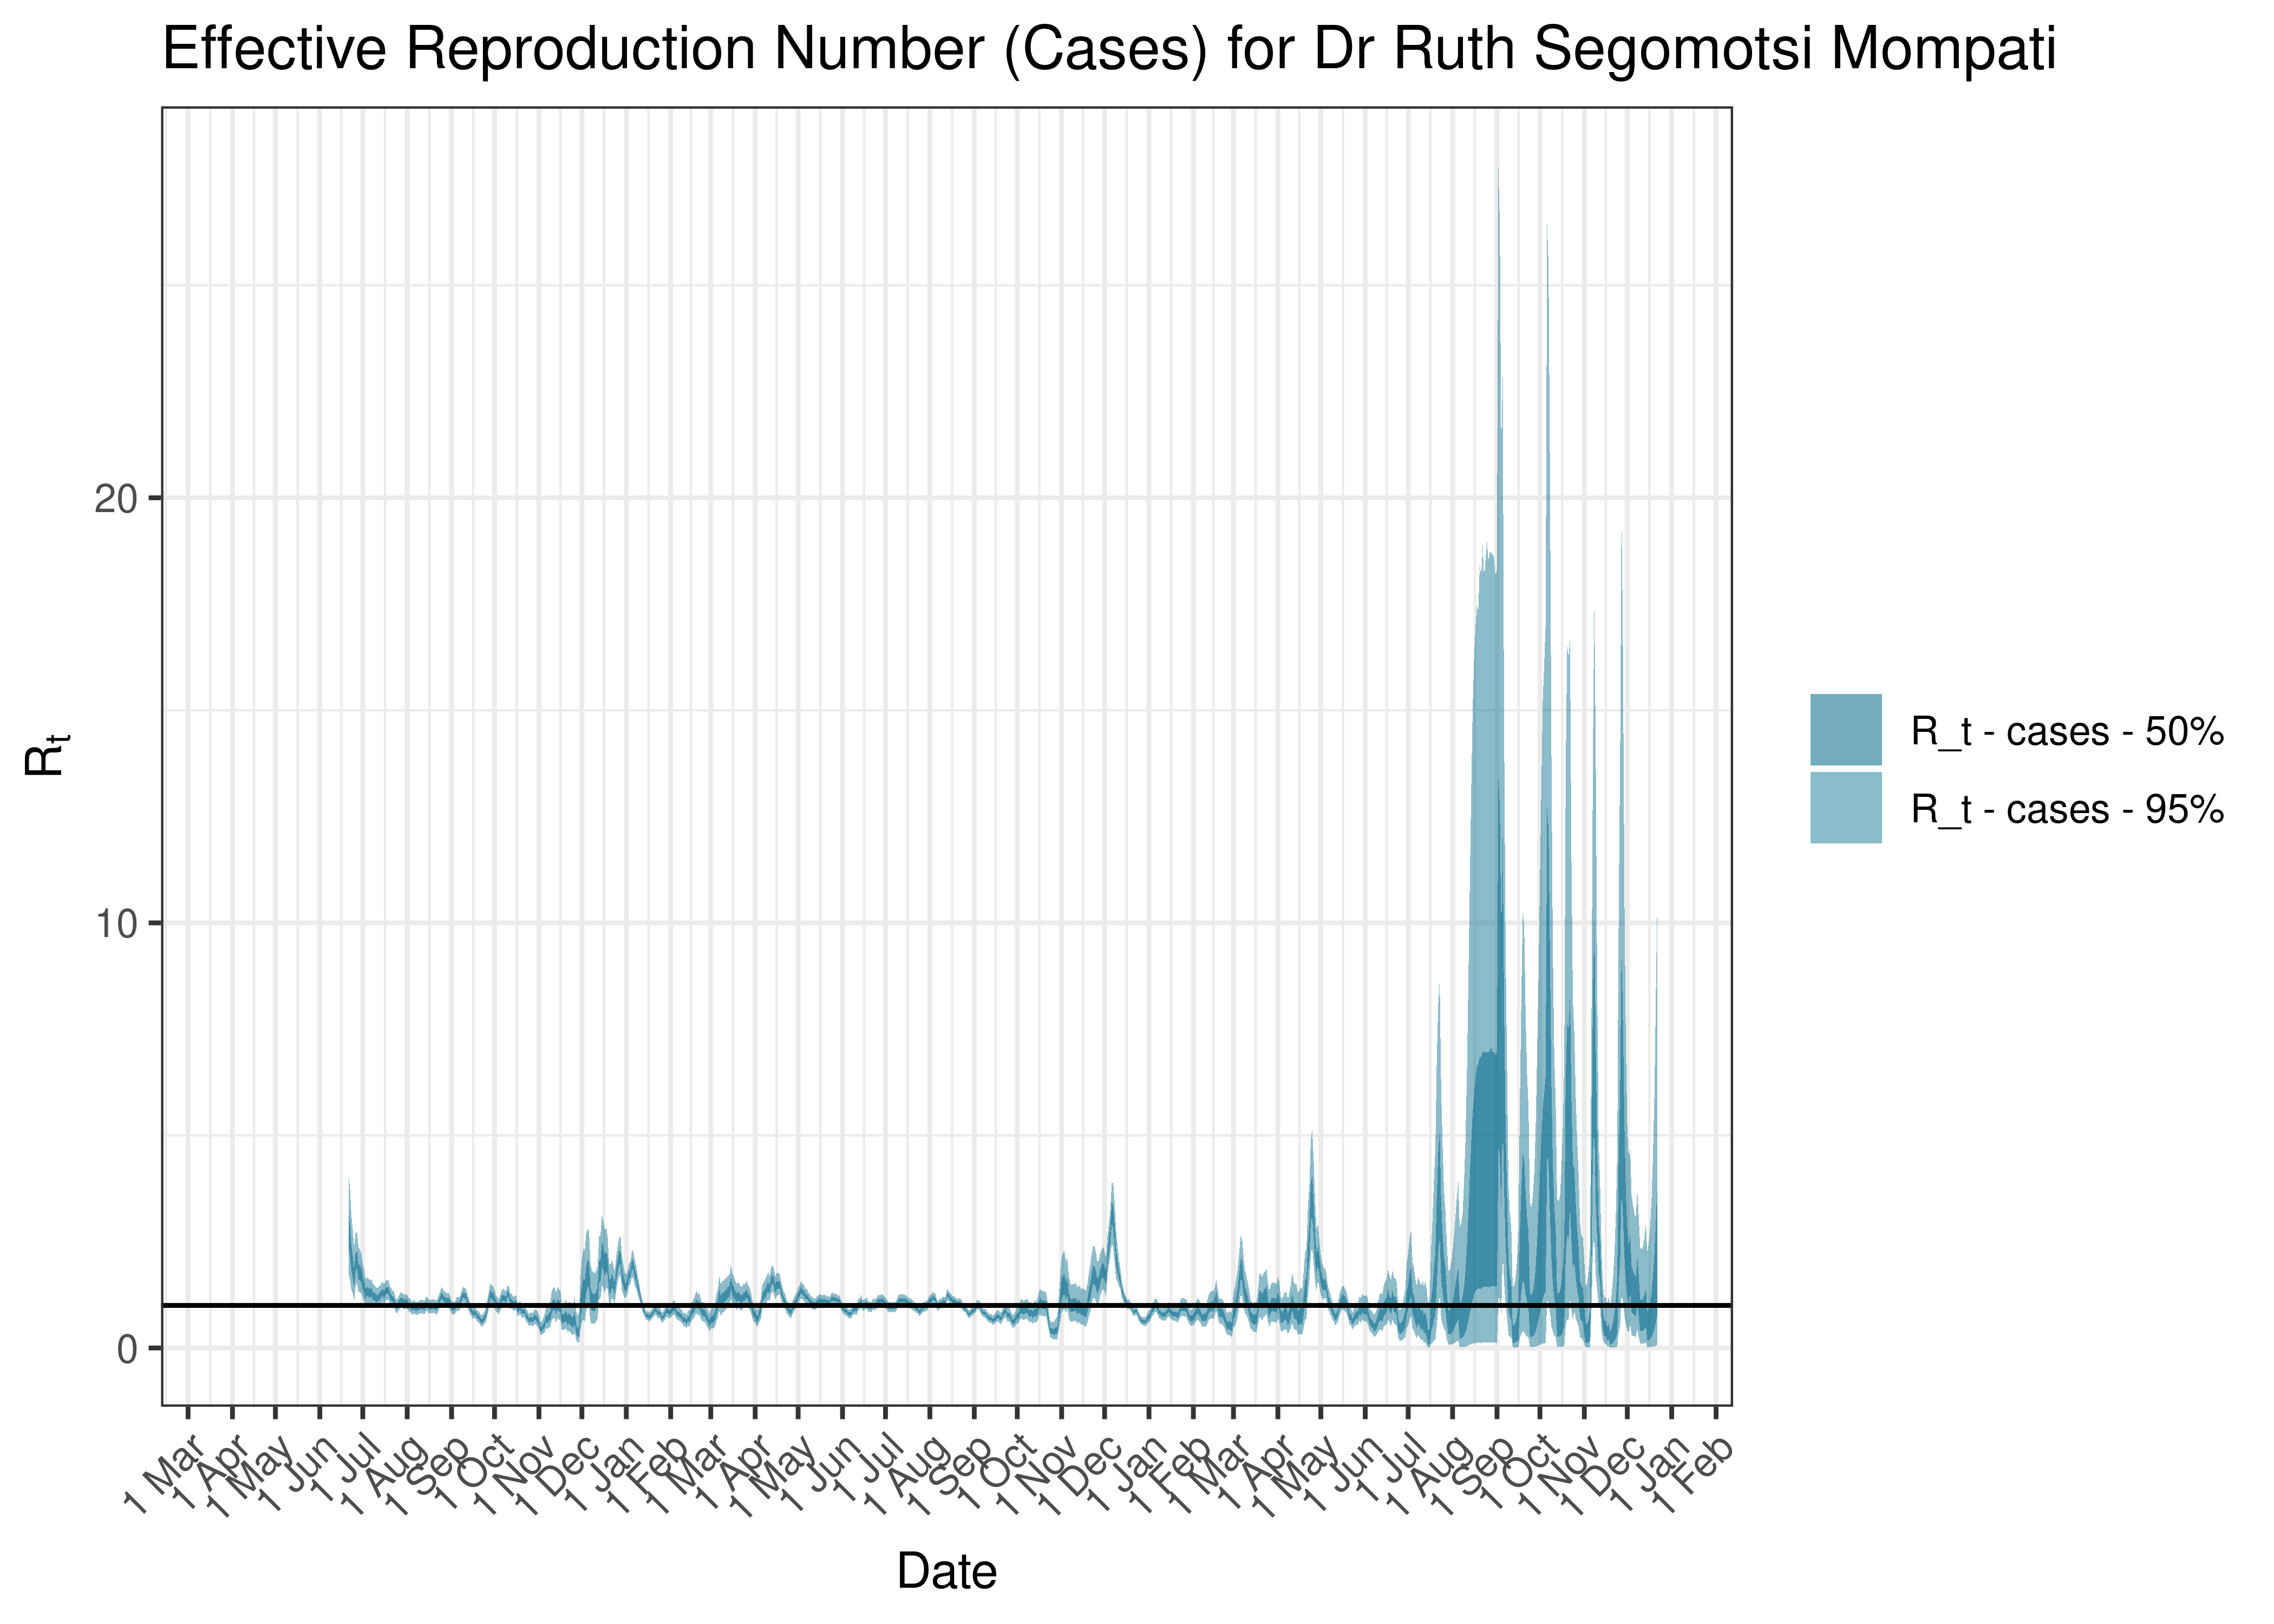 Estimated Effective Reproduction Number Based on Cases for Dr Ruth Segomotsi Mompati since 1 April 2020